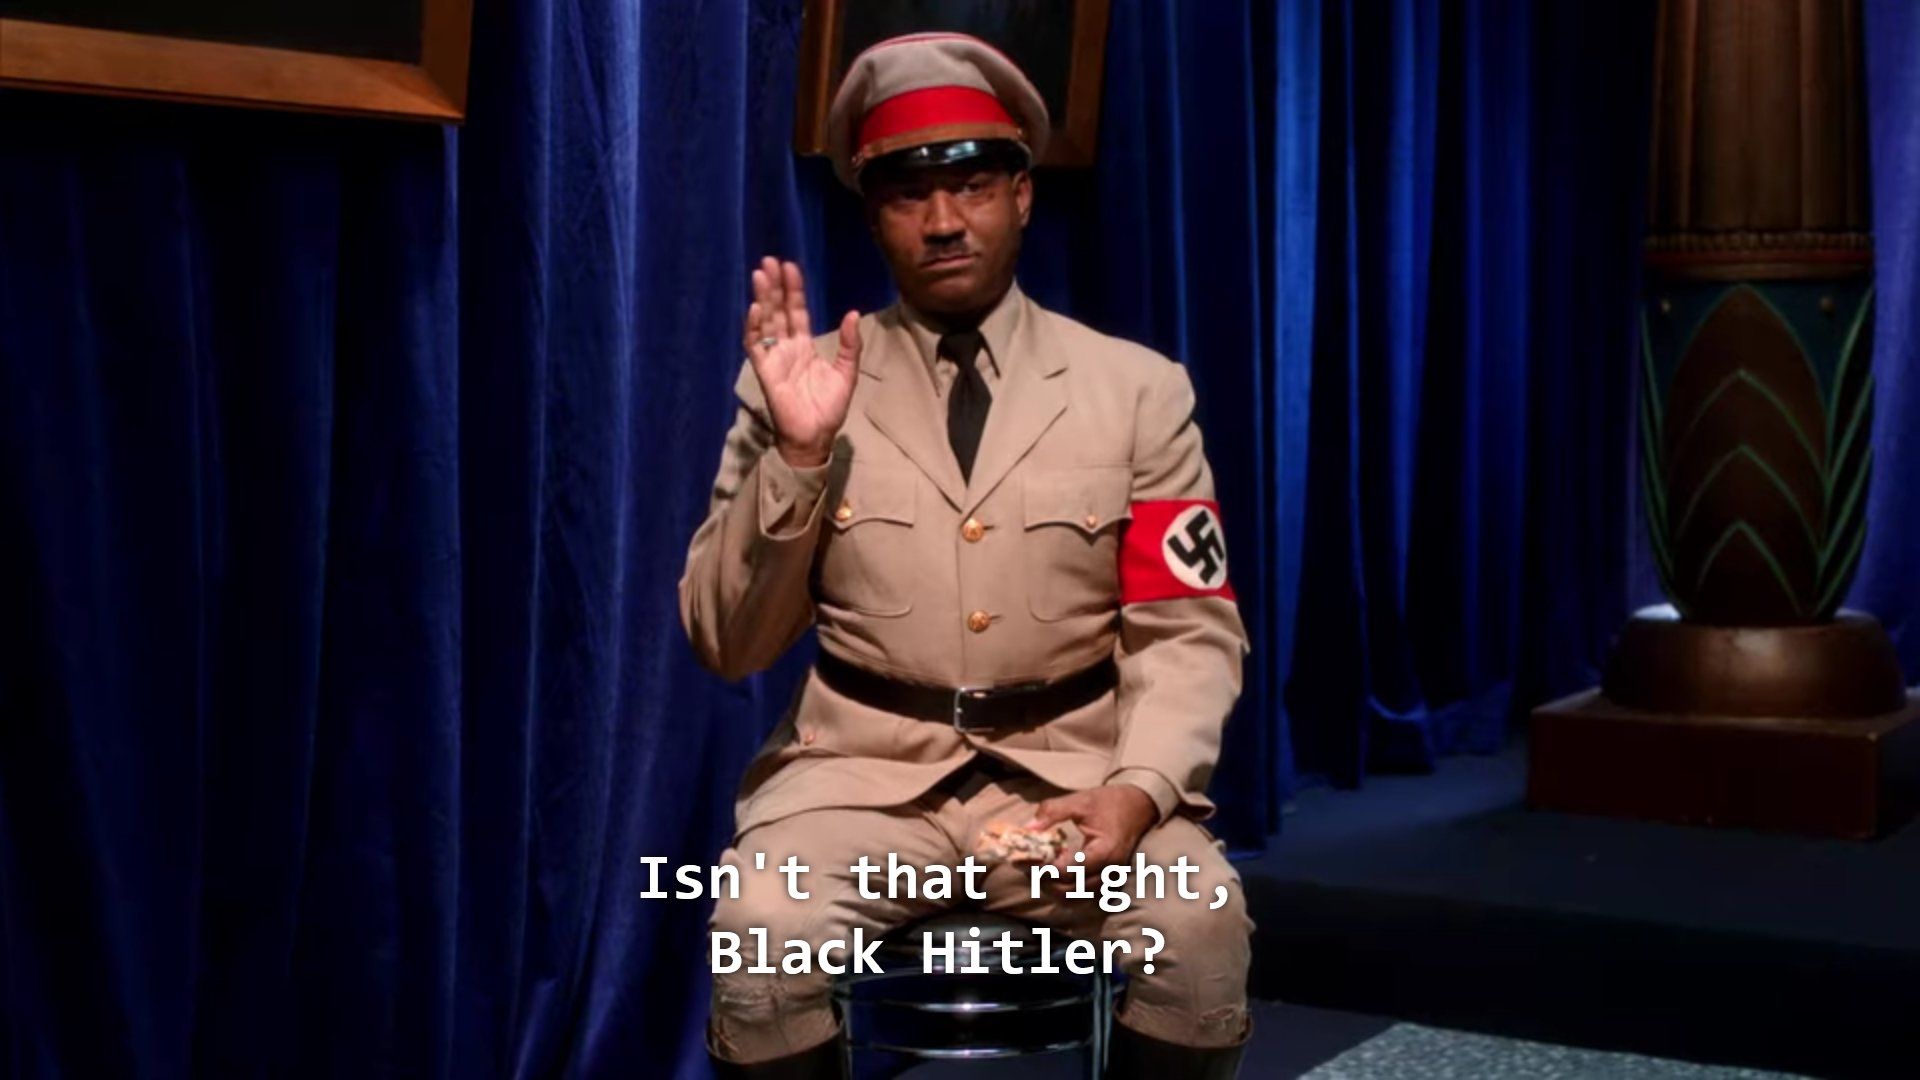 Kanye West's grandfather, 1945, colorized